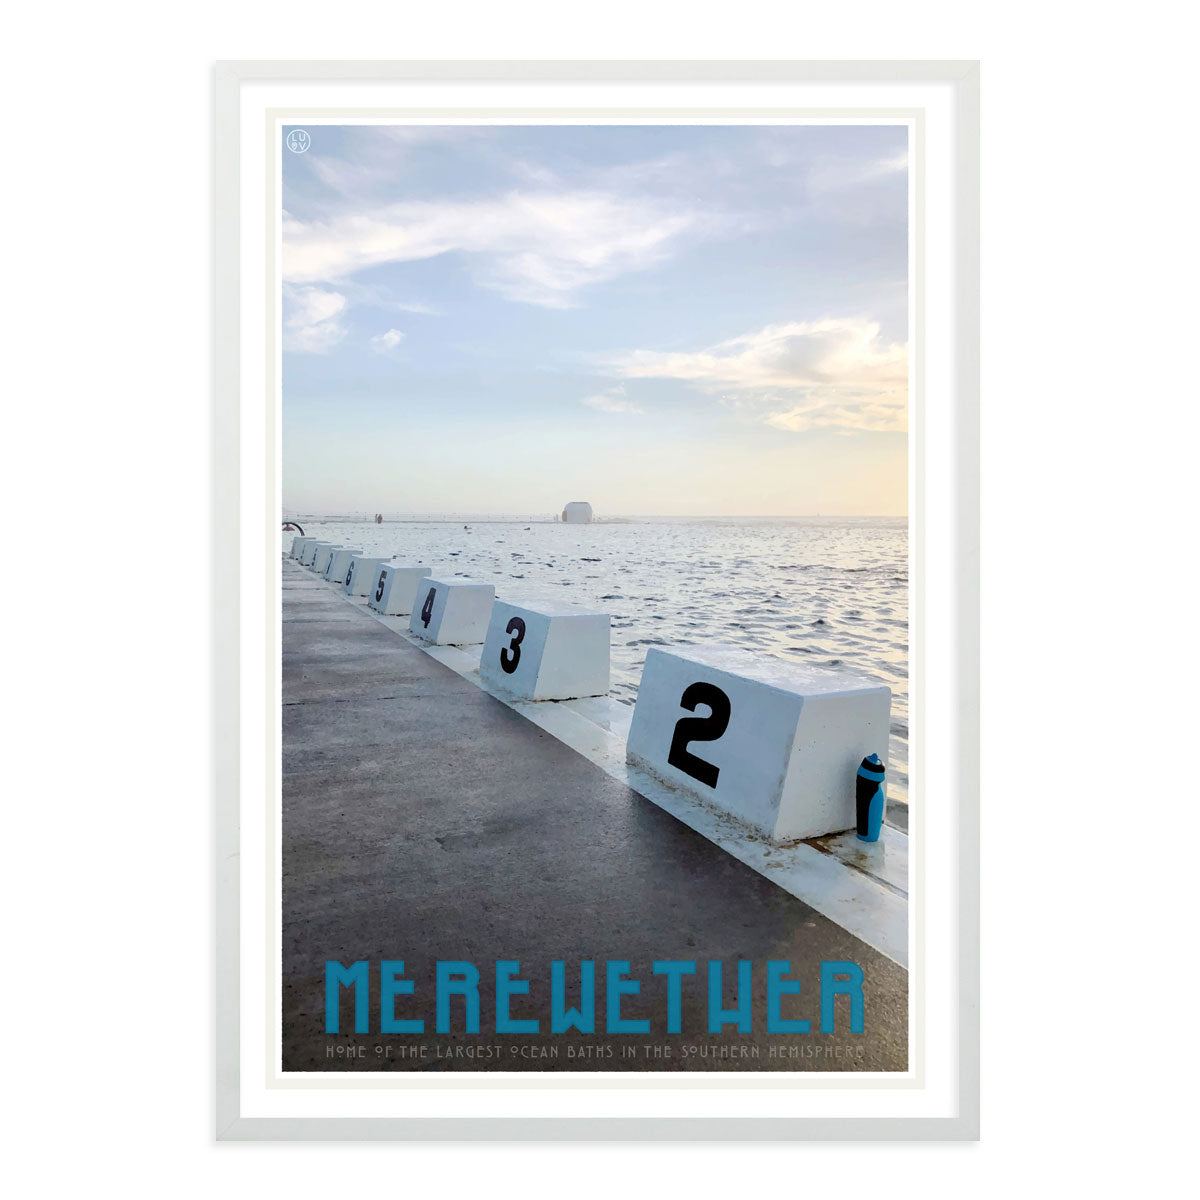 Merewether Pool vintage travel poster in white frame by places we luv